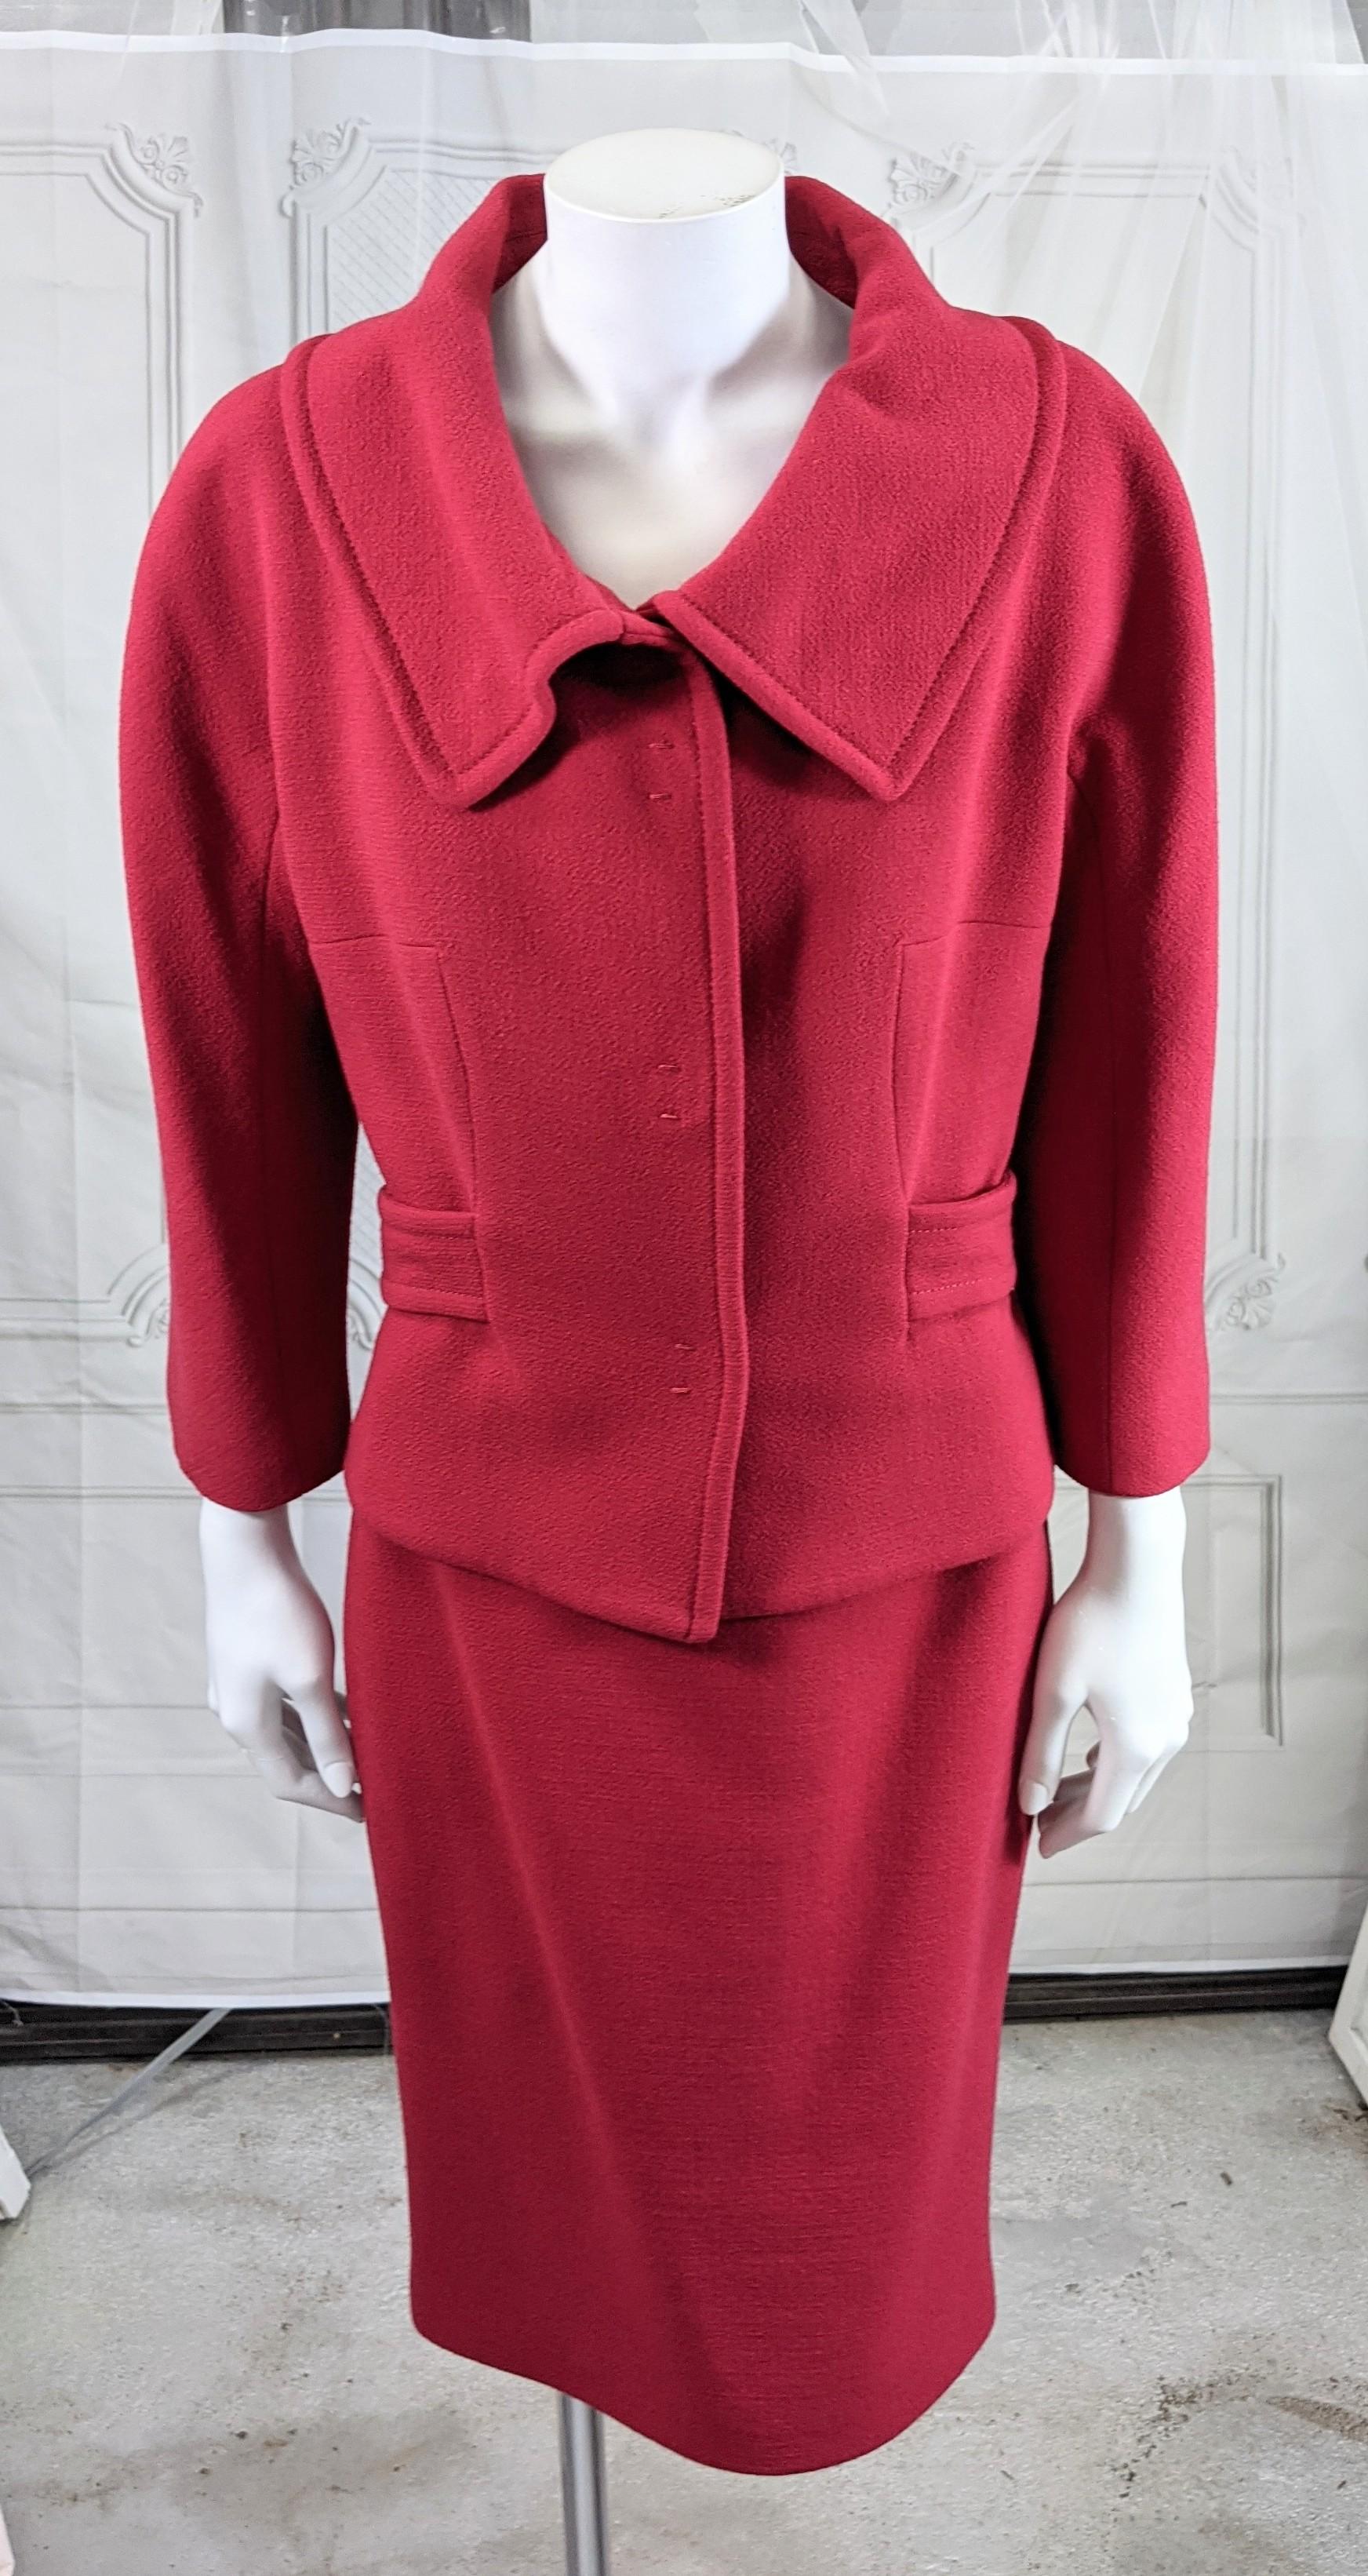 Elegant Giambatista Valli Rasberry Wool Crepe Suit in the Balenciaga style with open neck collar and half belt design on back. 3 large black snap closures and cropped sleeves. Matching slim skirt has knit trimmed waistband and back zip